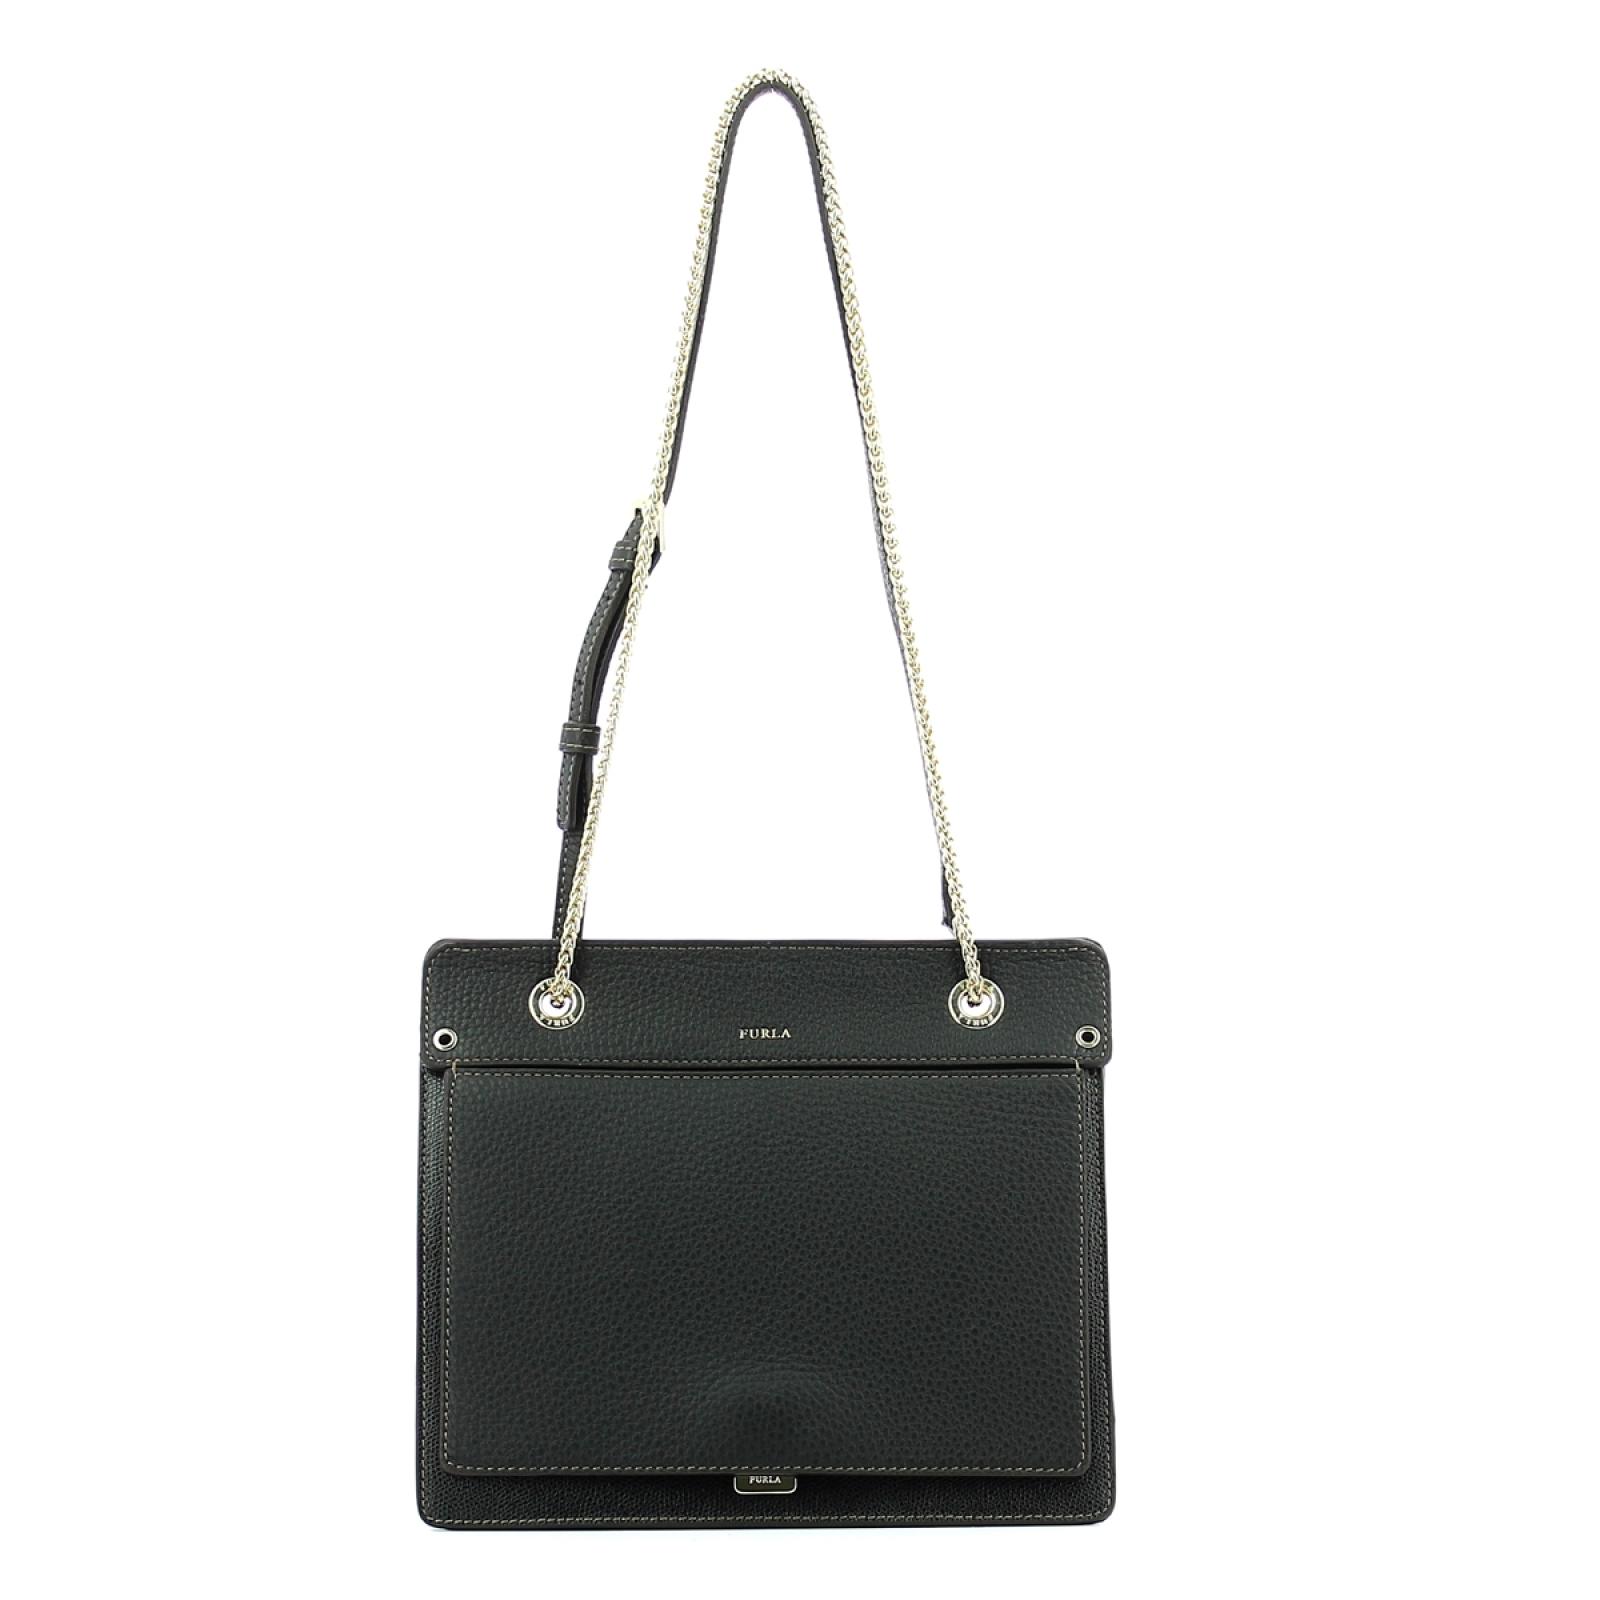 Shoulderbag with chain Like S-ONYX-UN